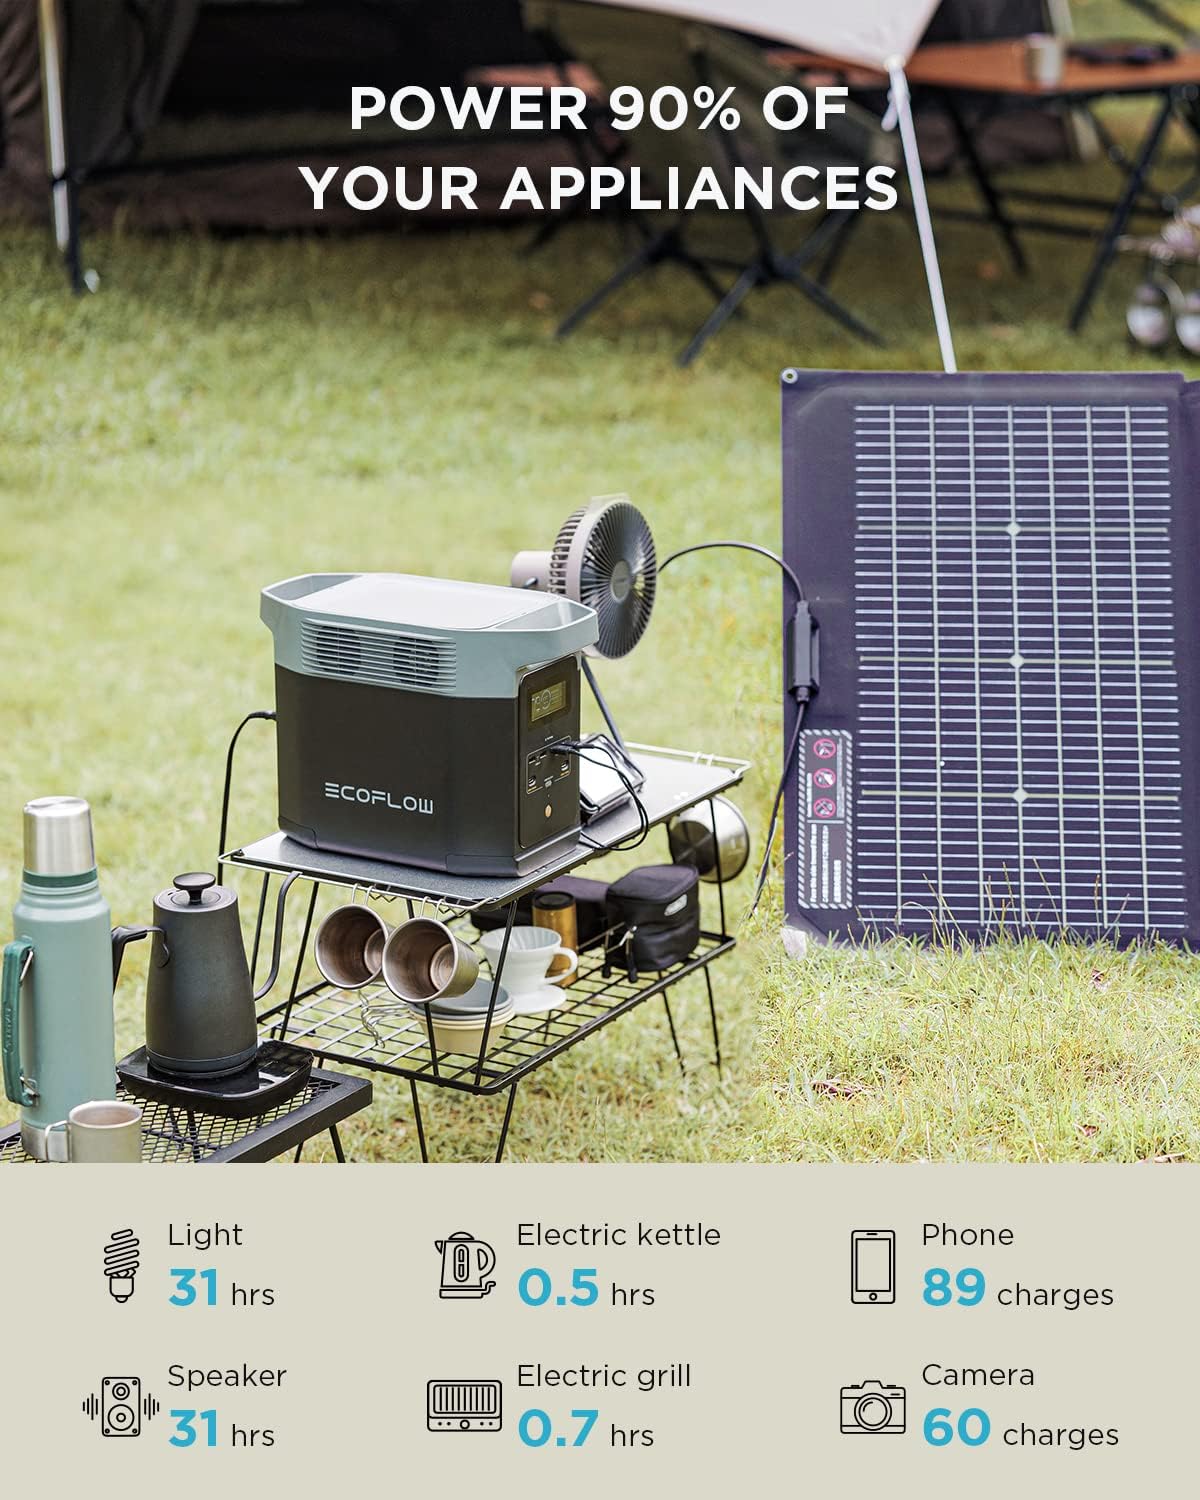 Professional Title: "High-Performance Solar Generator DELTA2 with 220W Solar Panel, Lfp(Lifepo4) Battery, Rapid Charging, Portable Power Station for Home Backup Power, Camping & Rvs"